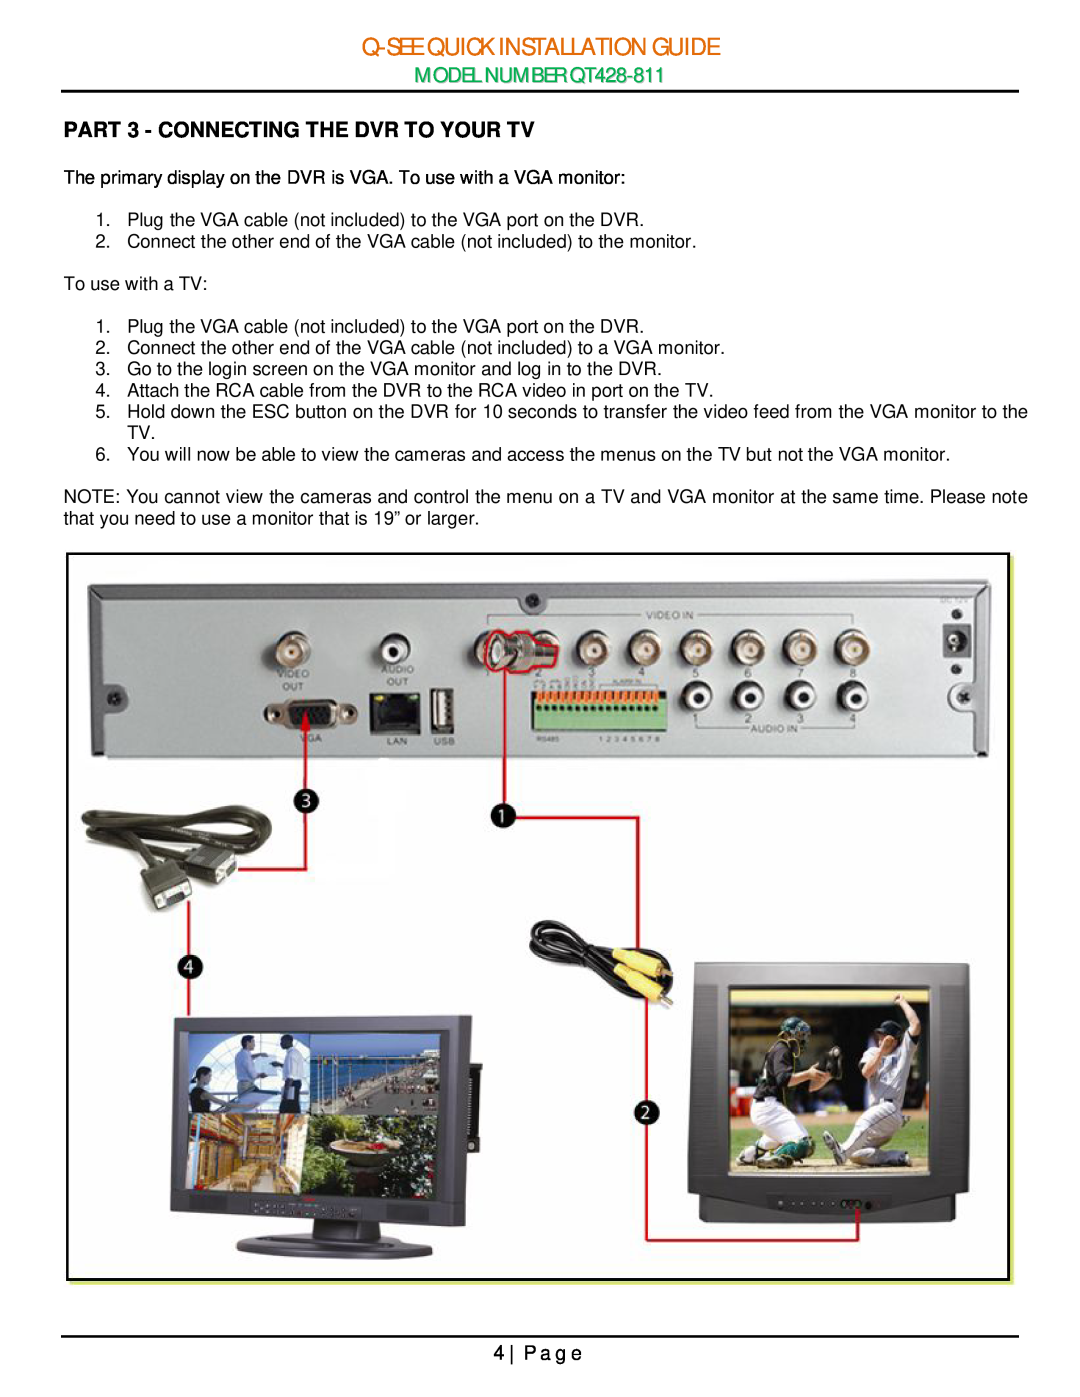 Q-See manual PART 3 - CONNECTING THE DVR TO YOUR TV, P a g e, Q-See Quick Installation Guide, MODEL NUMBER QT428-811 